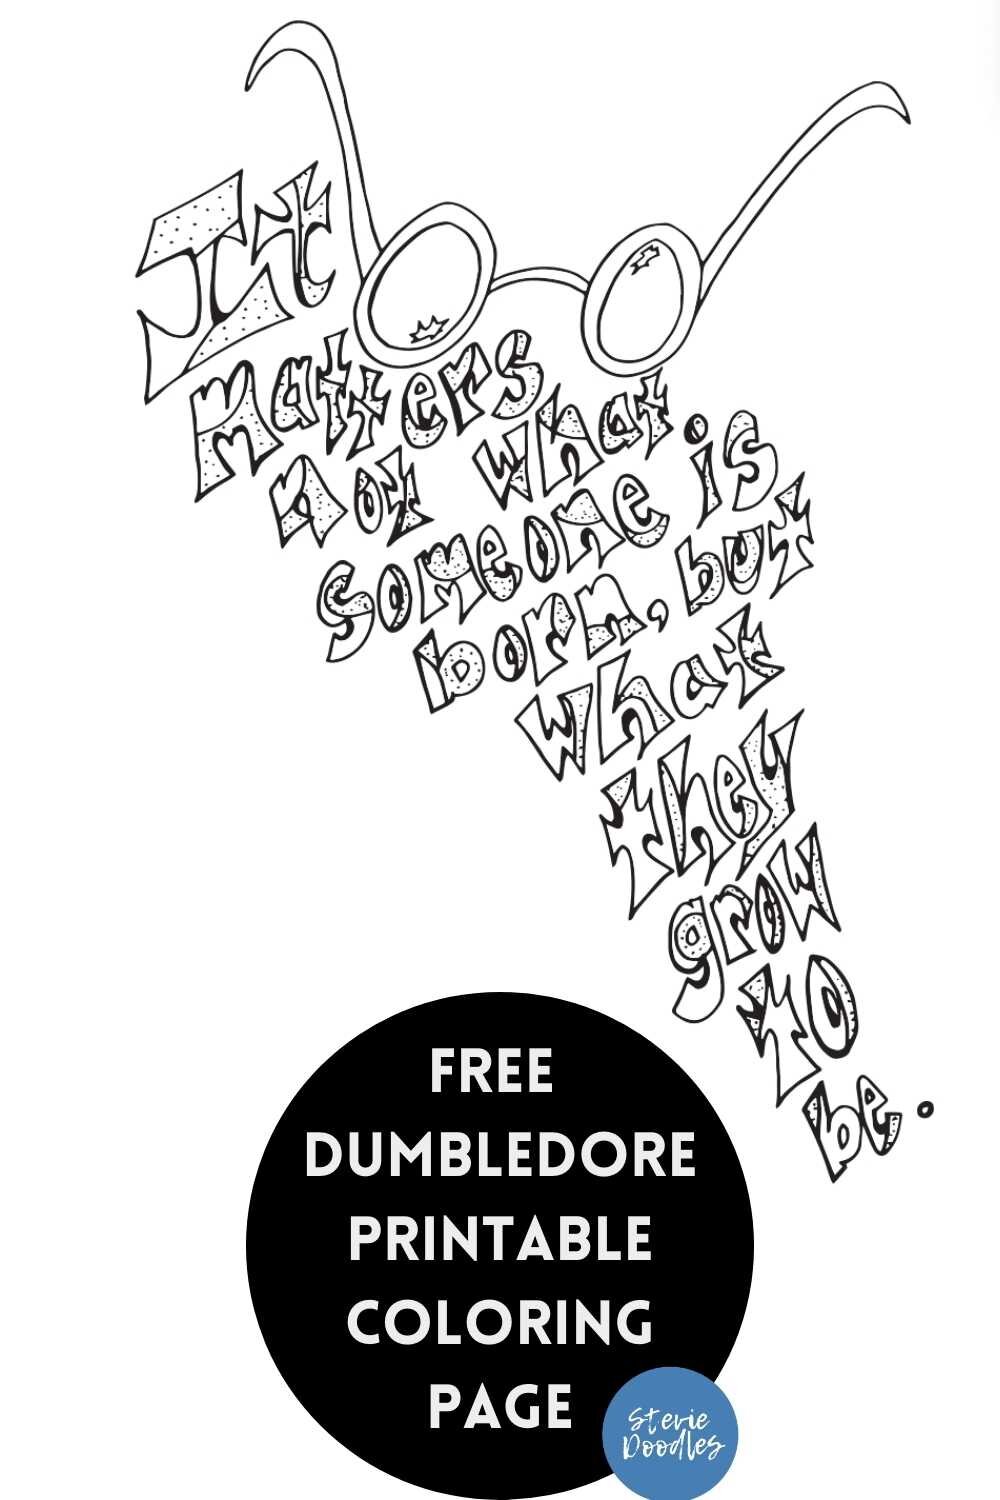 free dumbledore coloring page it matters not.jpg